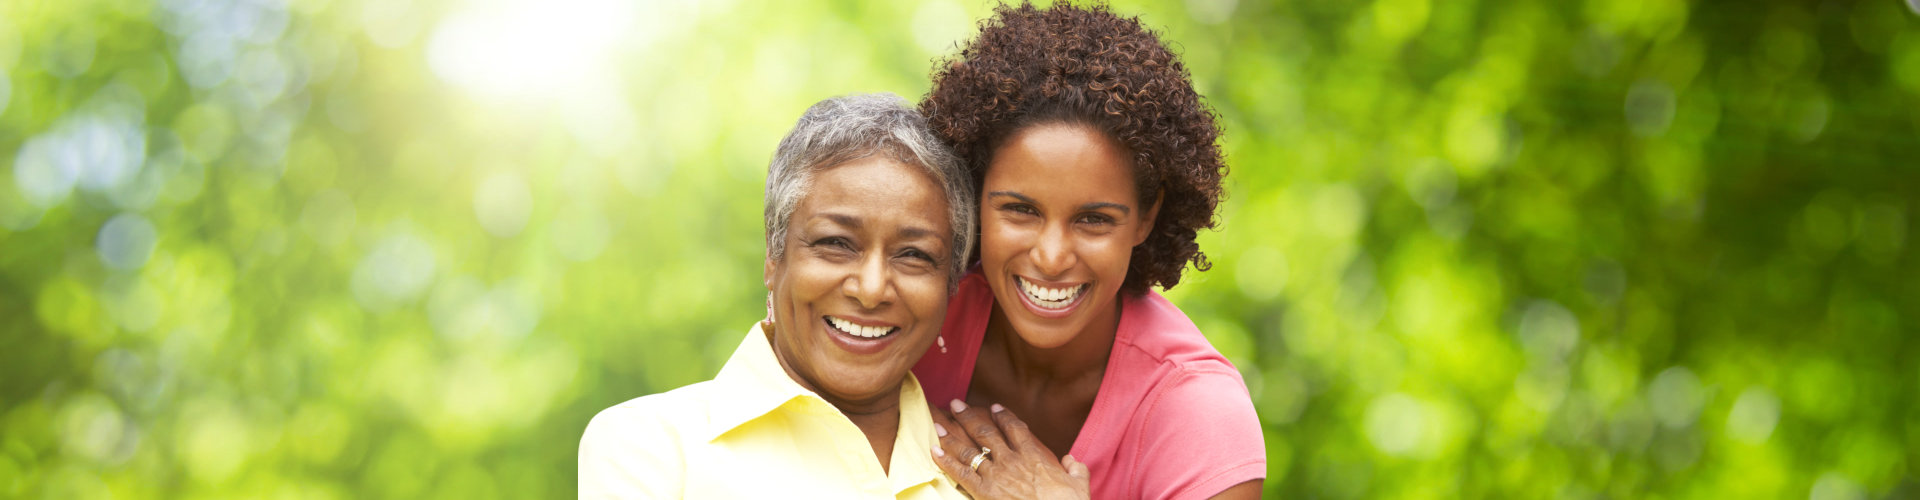 female caregiver with her client smiling